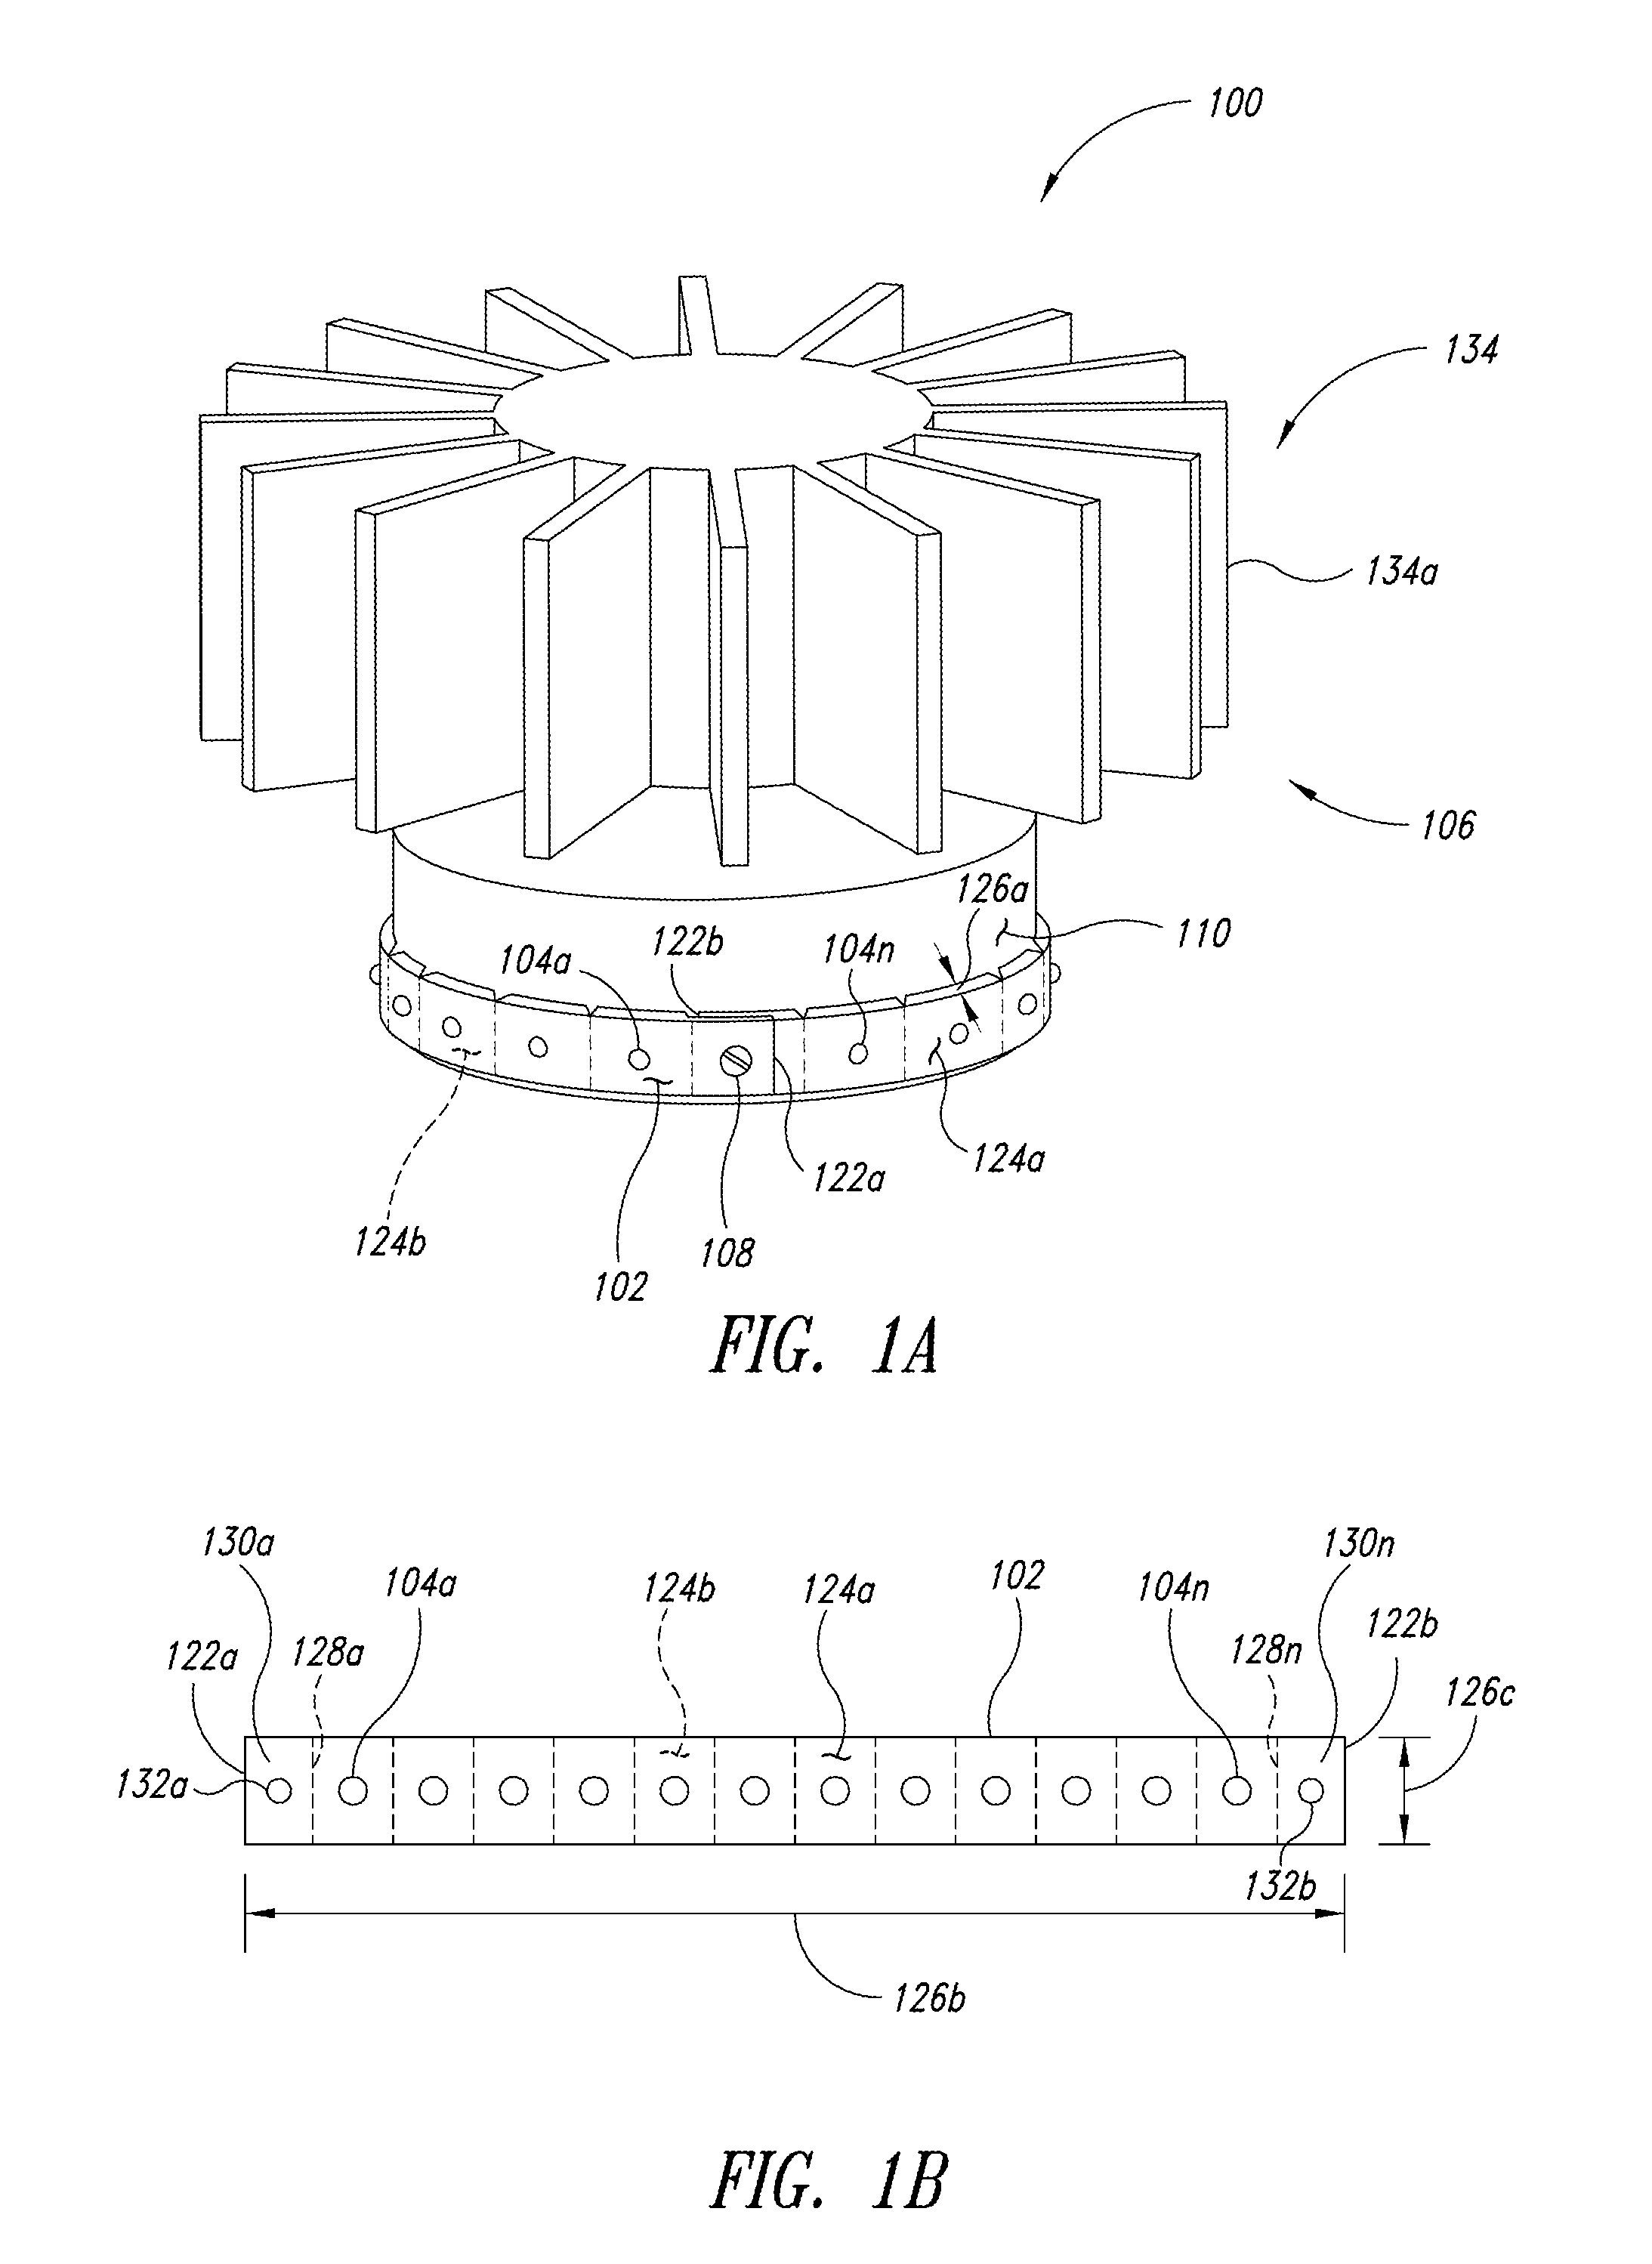 Solid state lighting device and method employing heat exchanger thermally coupled circuit board